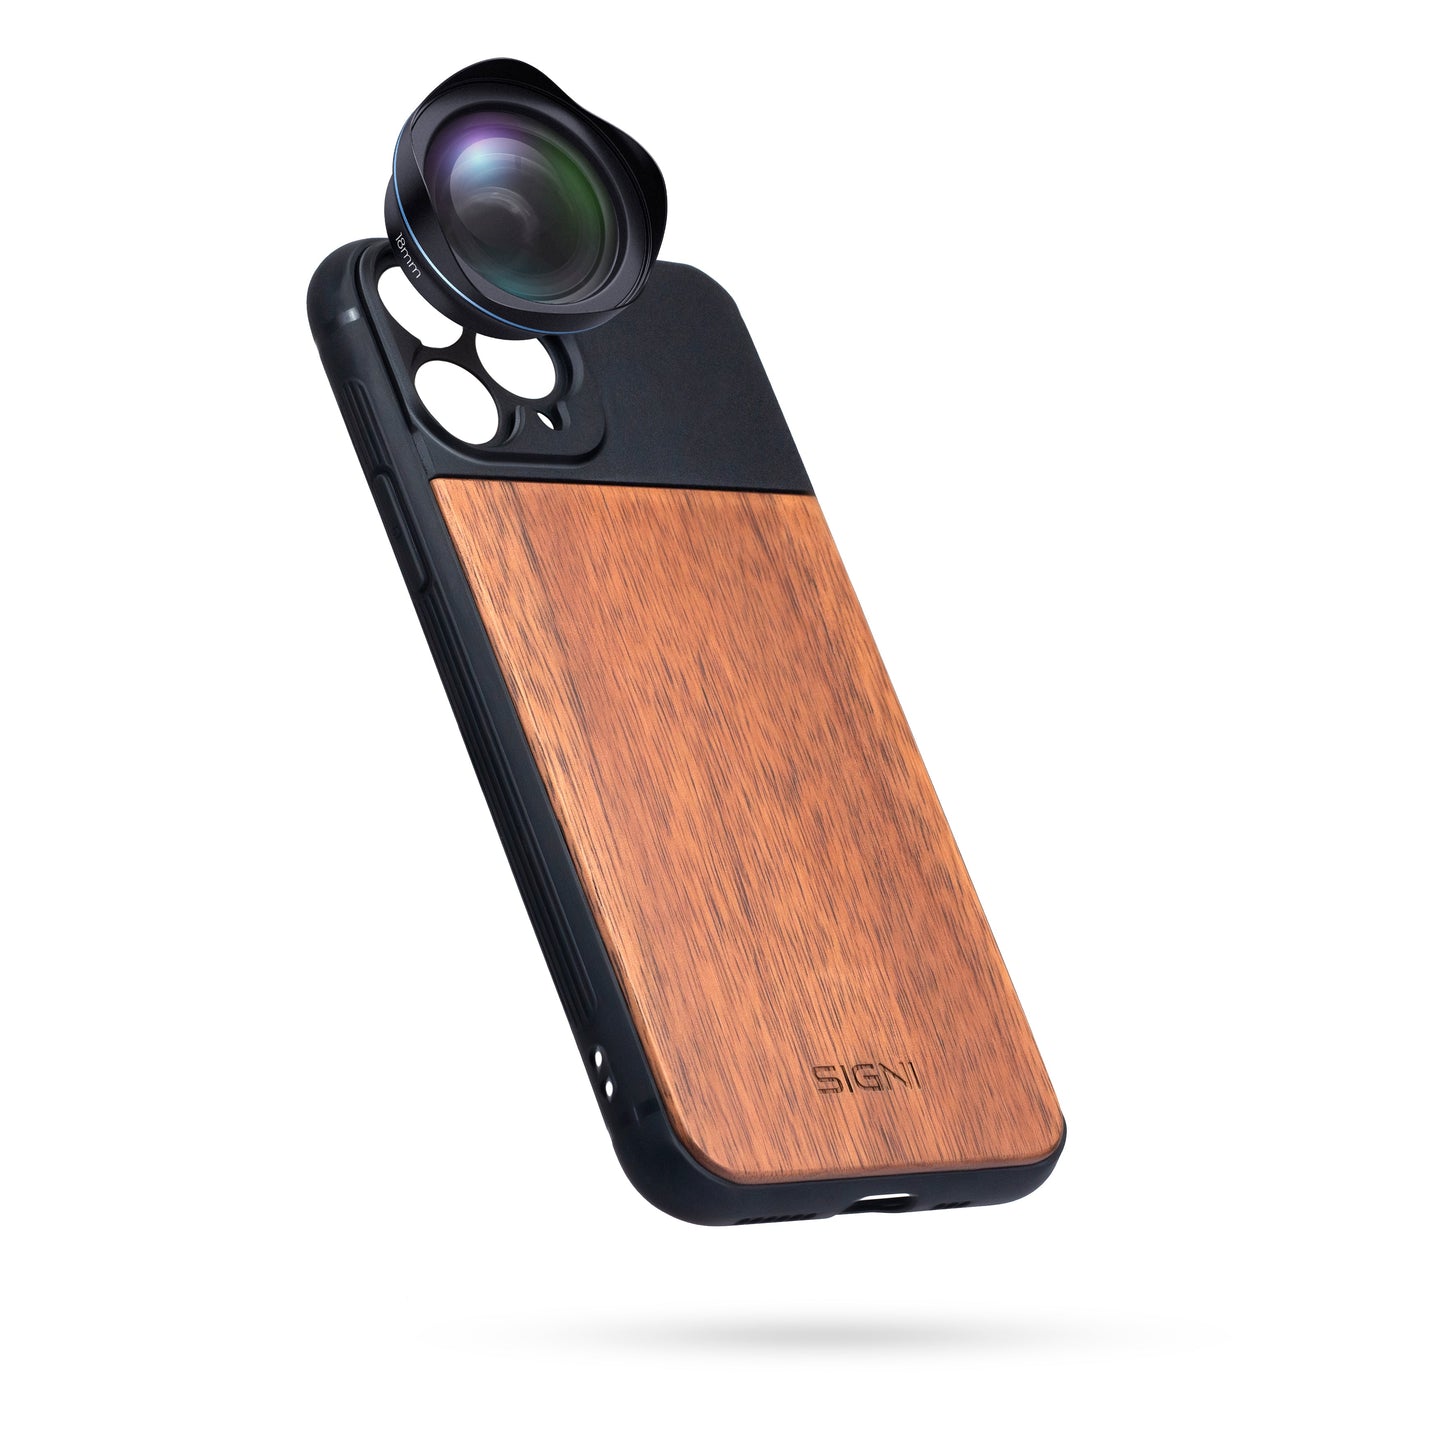 SKYVIK SIGNI One Wooden Mobile Lens case iPhone 11 Pro